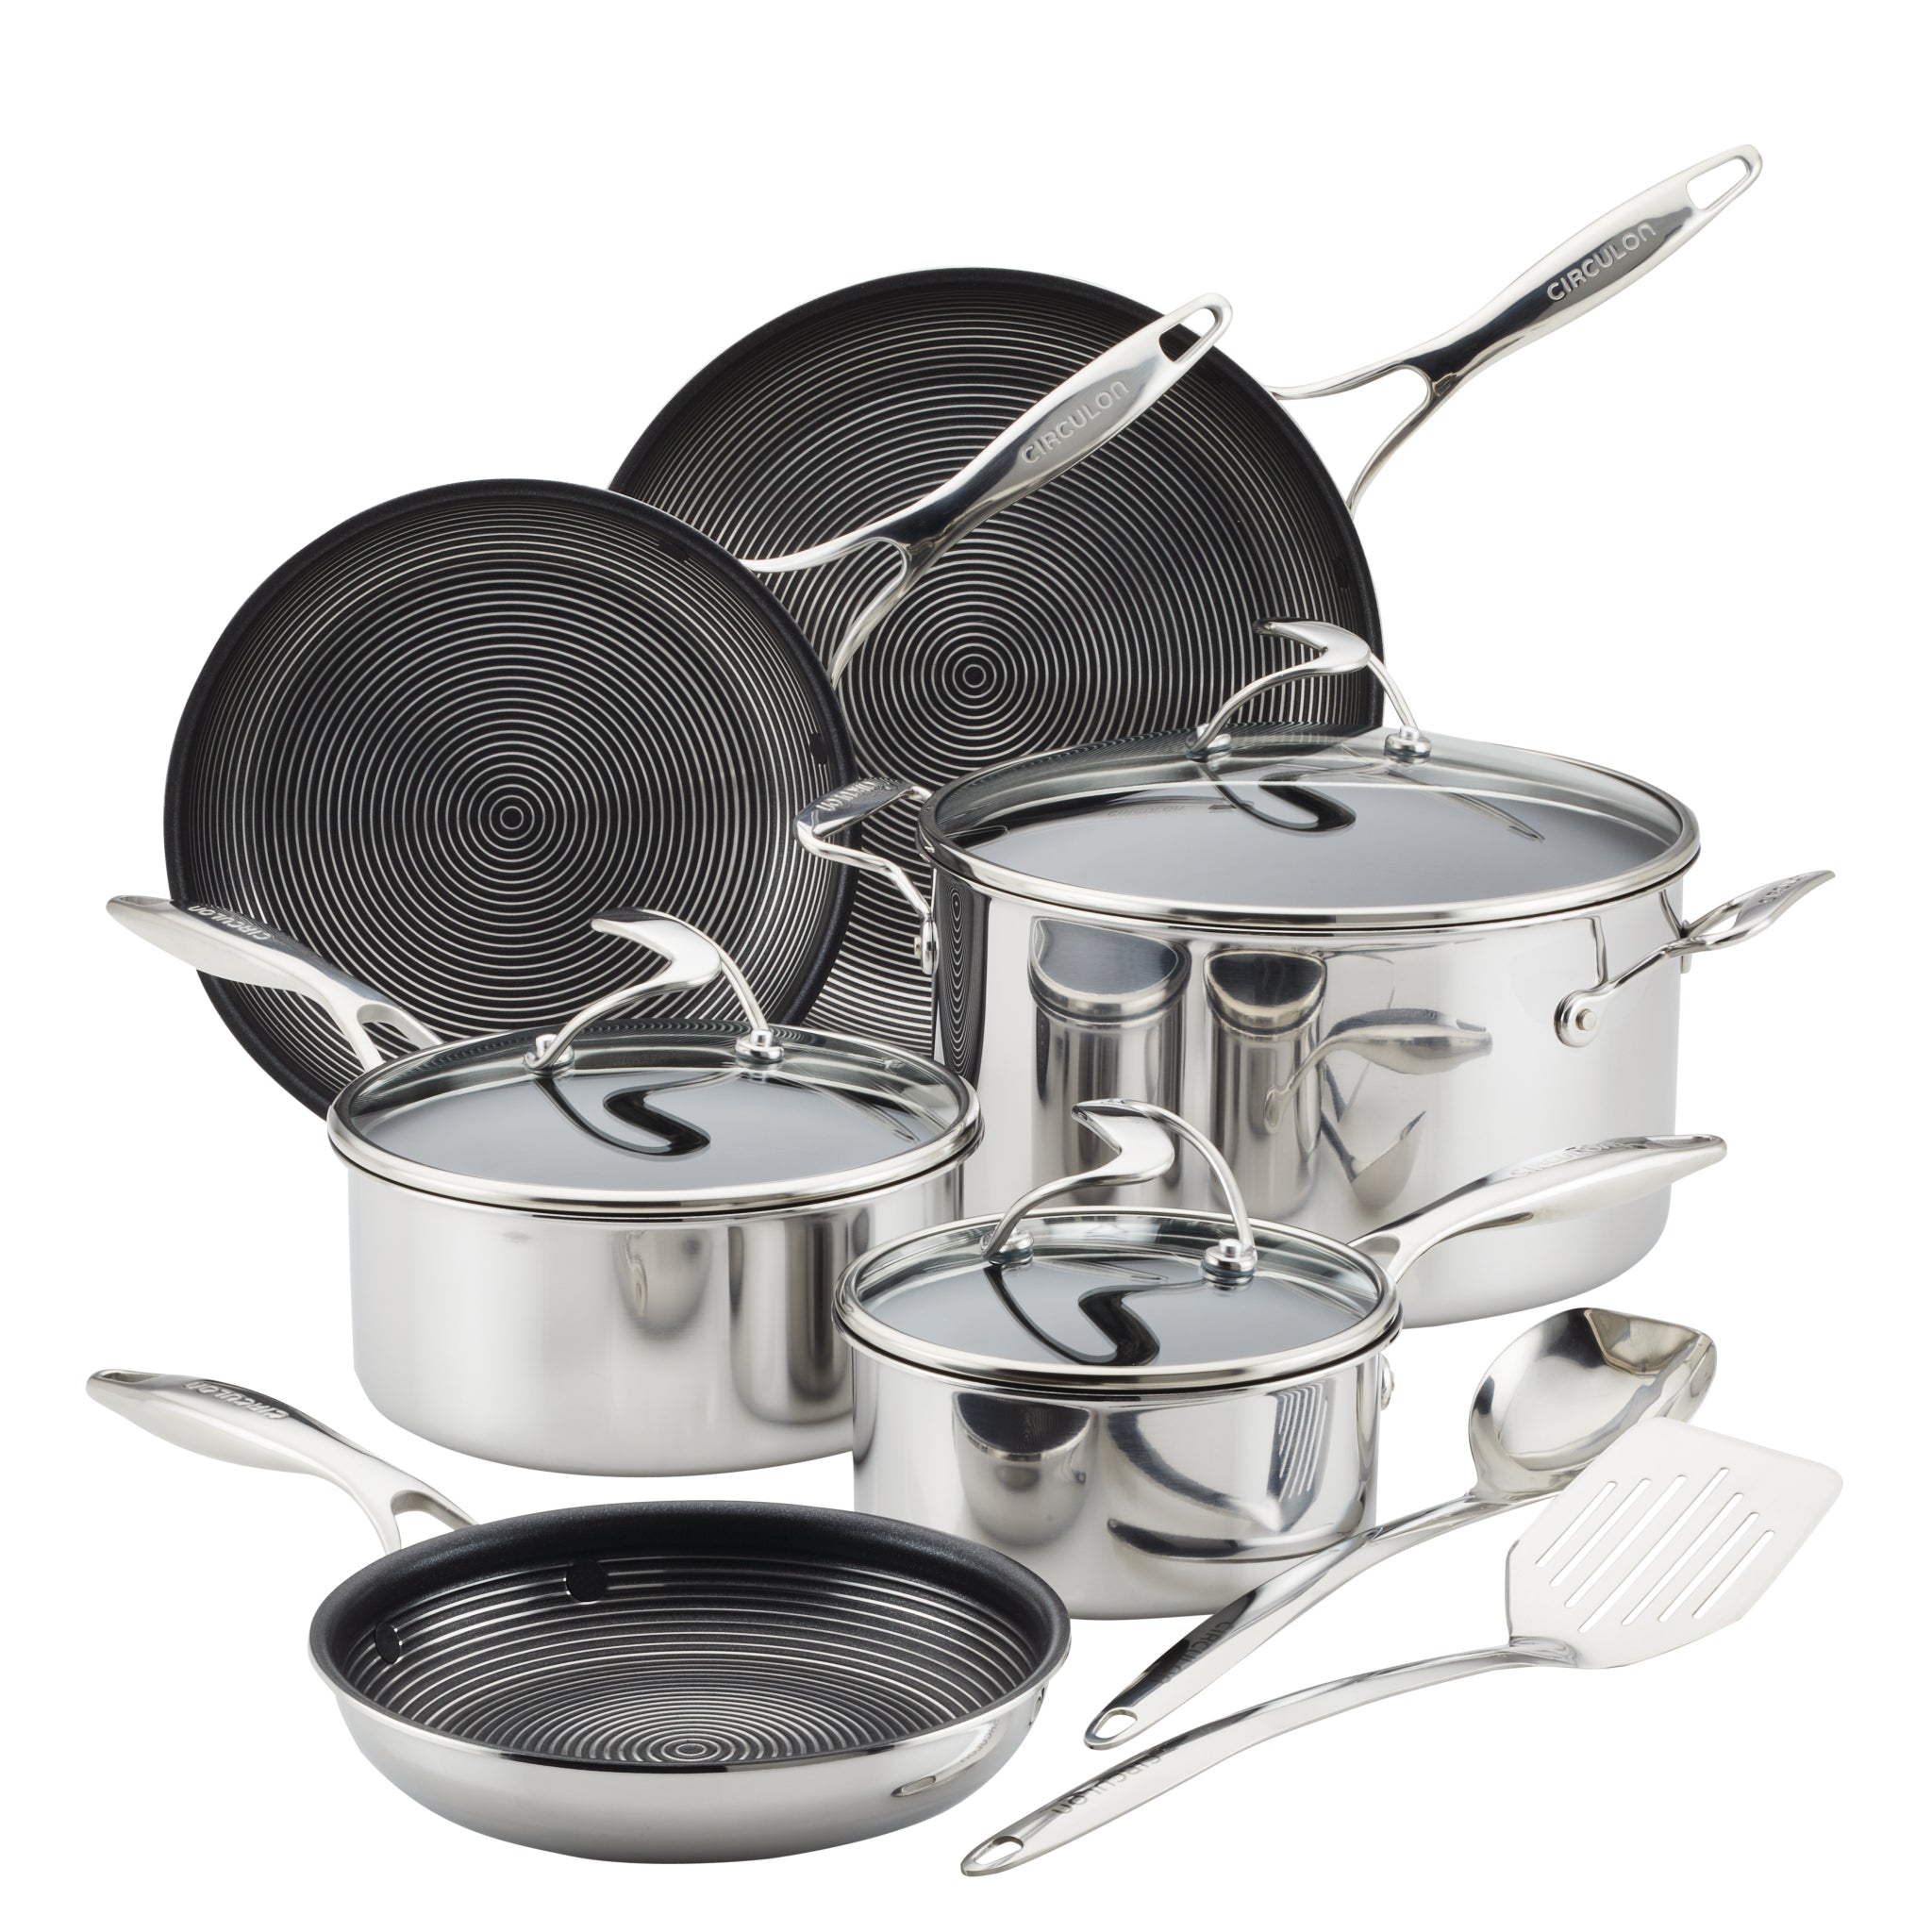 11-Piece Clad Stainless Steel and Hybrid Nonstick Cookware Set